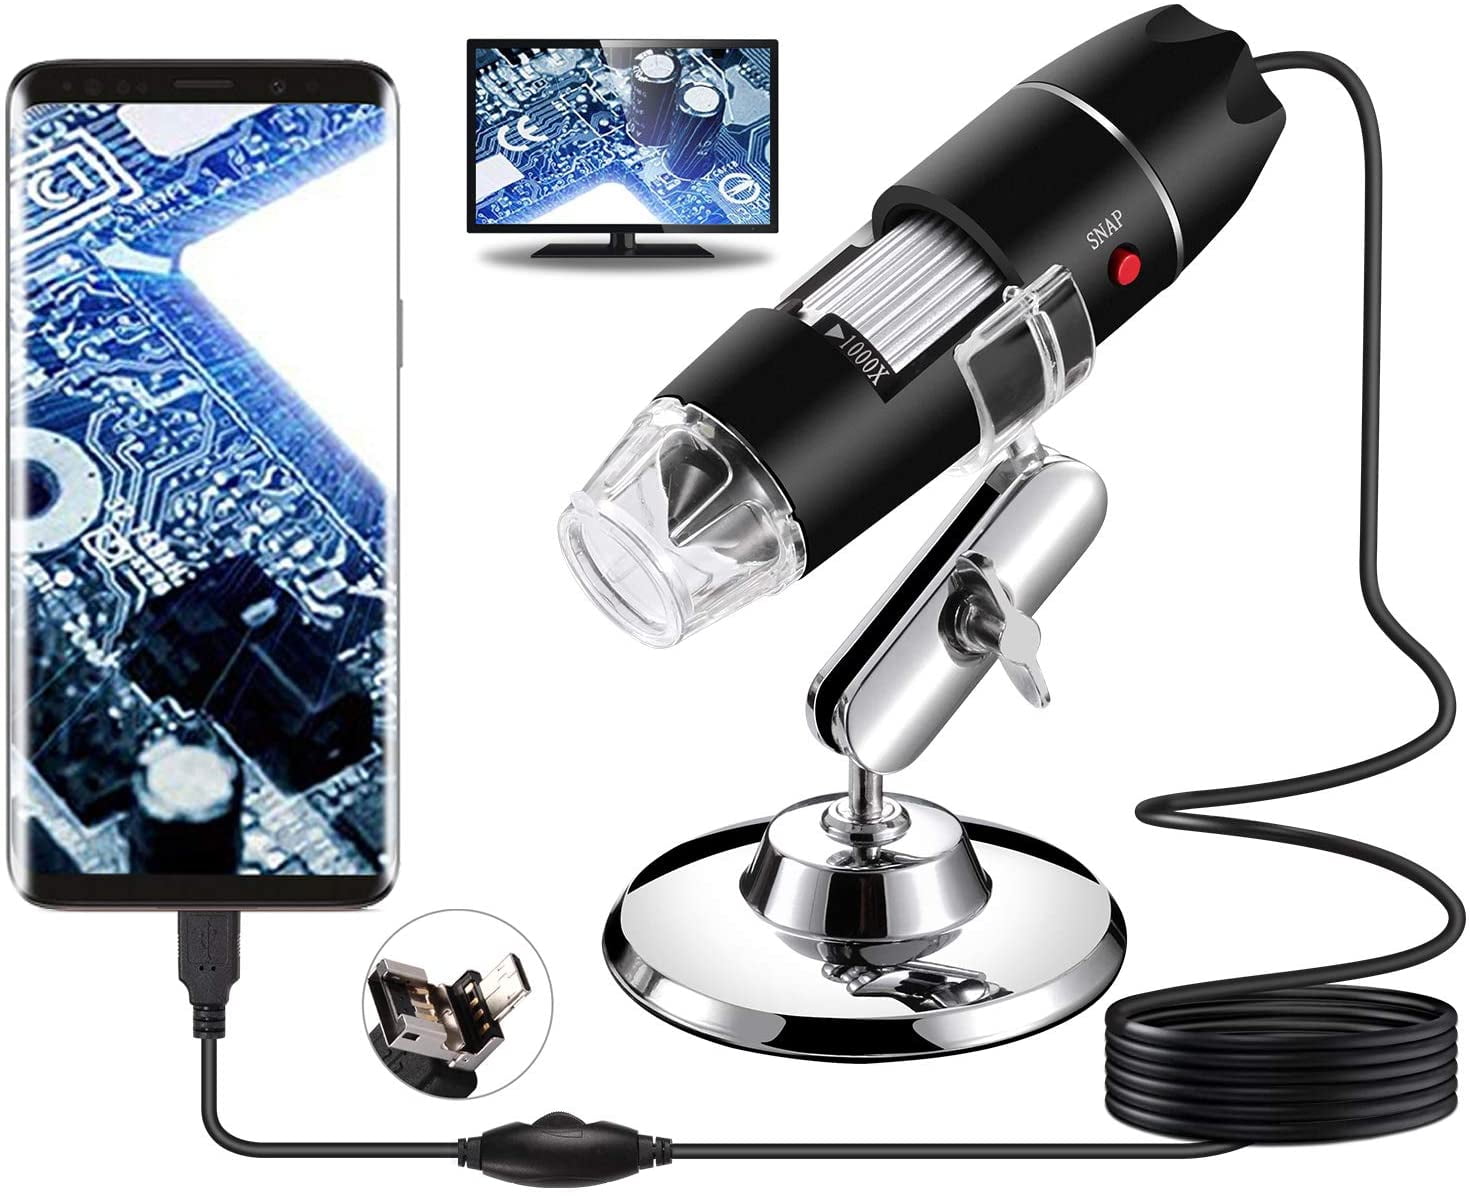 8 LED Magnification Endoscope Camera with Plastic Stand & Carrying Case Compatible for Android Windows 7 8 10 Mac Kids Adults Mini Microscope Gadgets 50X to 1000X Black USB Digital Microscope 